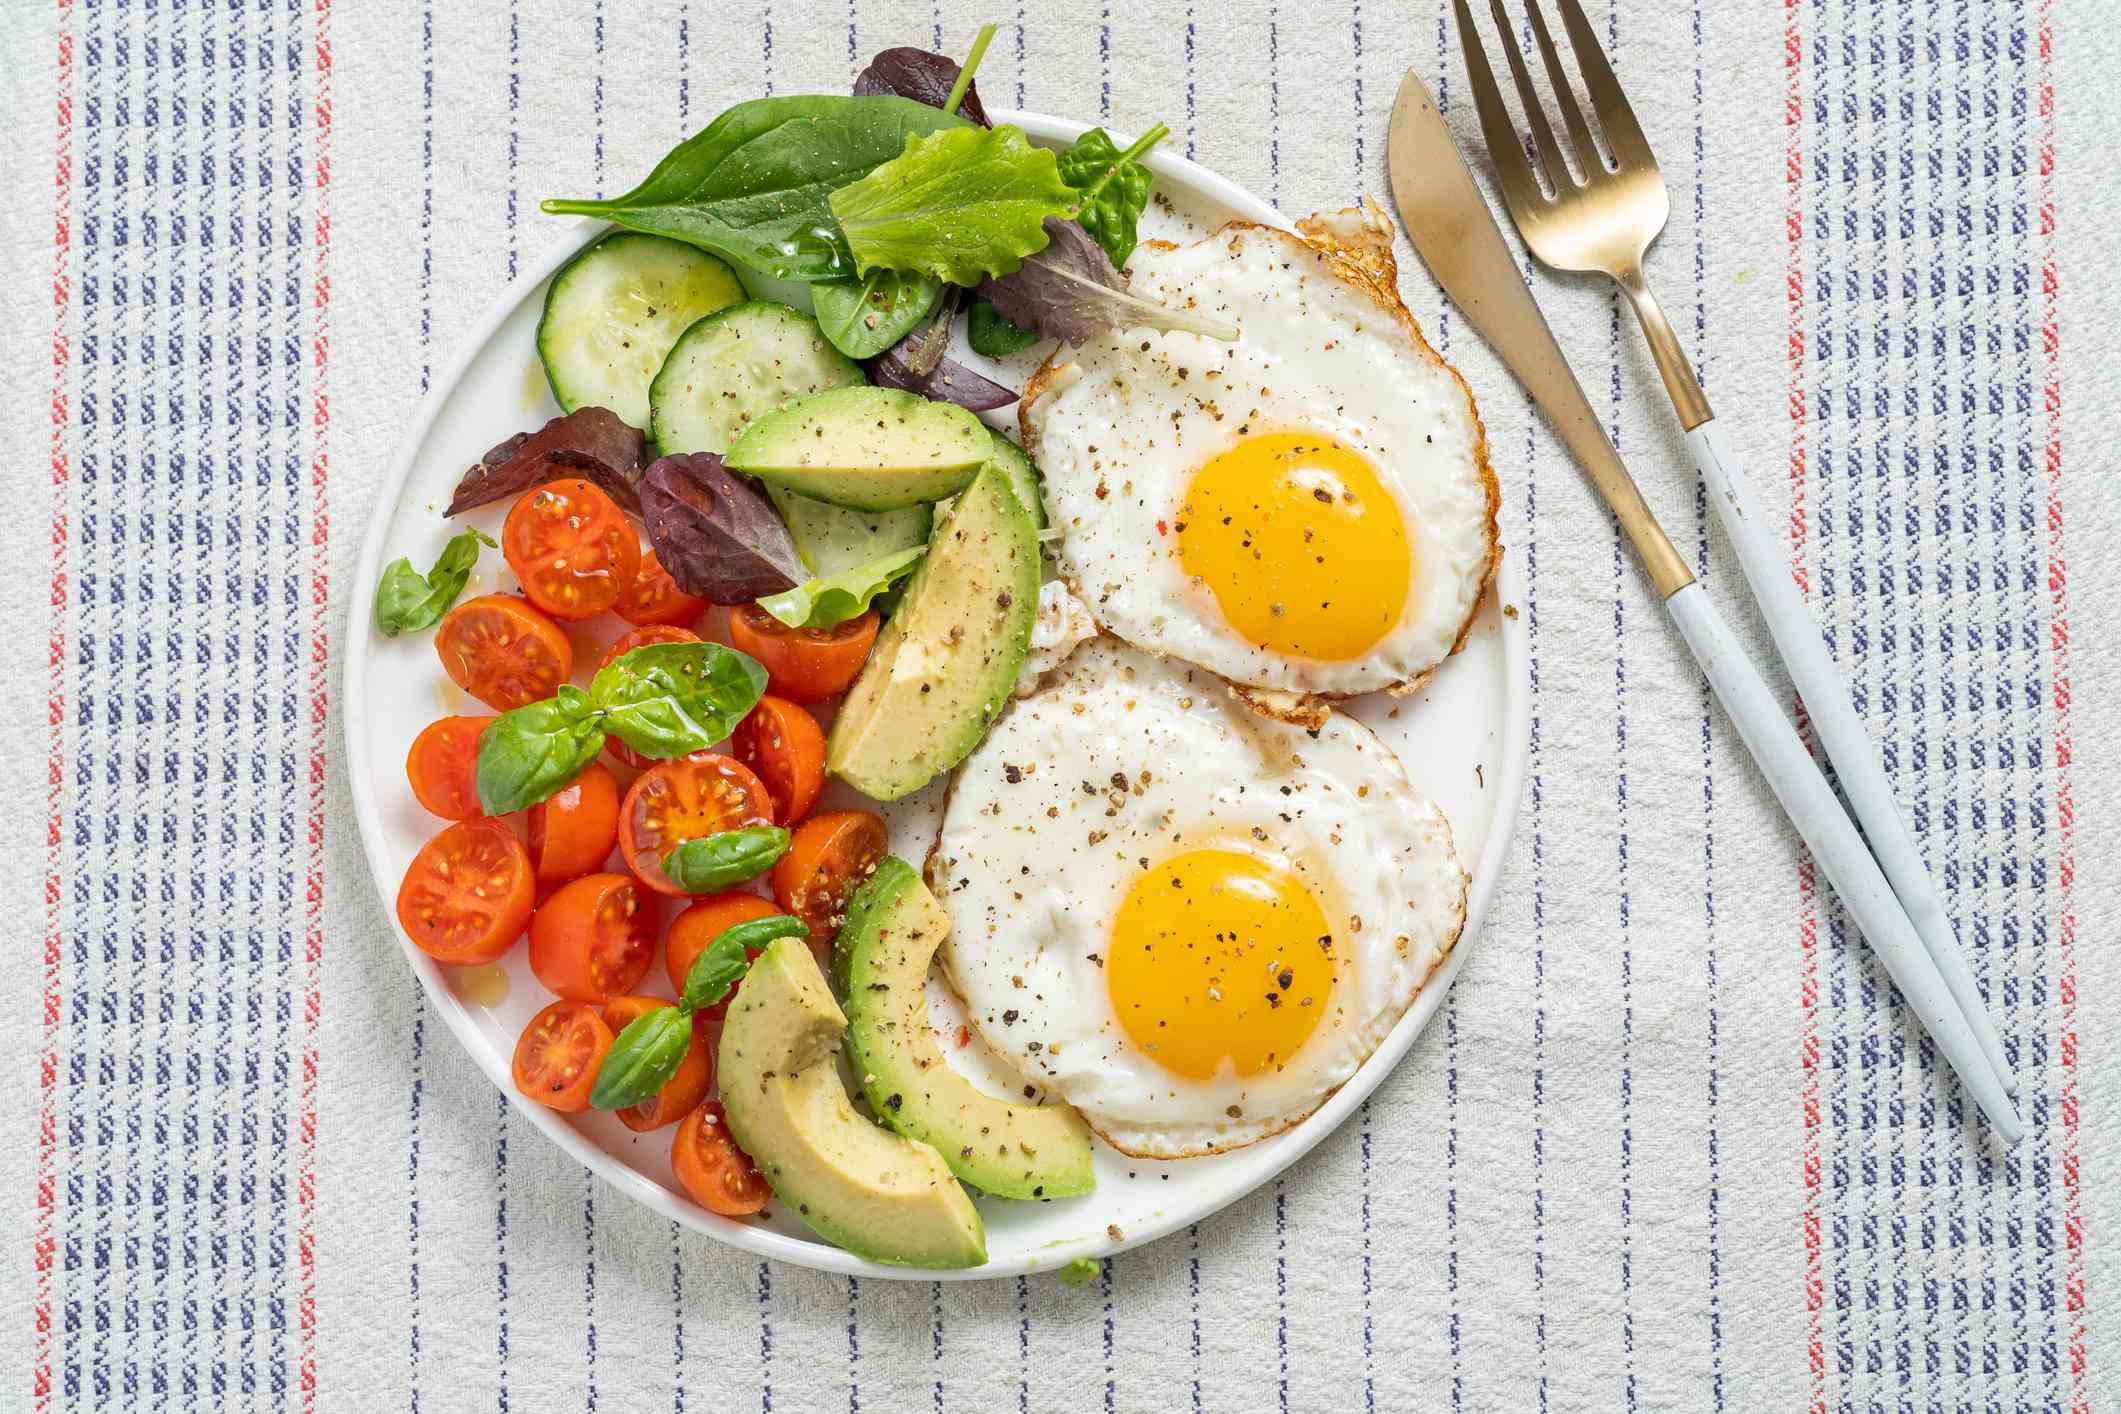 Breakfast Foods That are Good for You